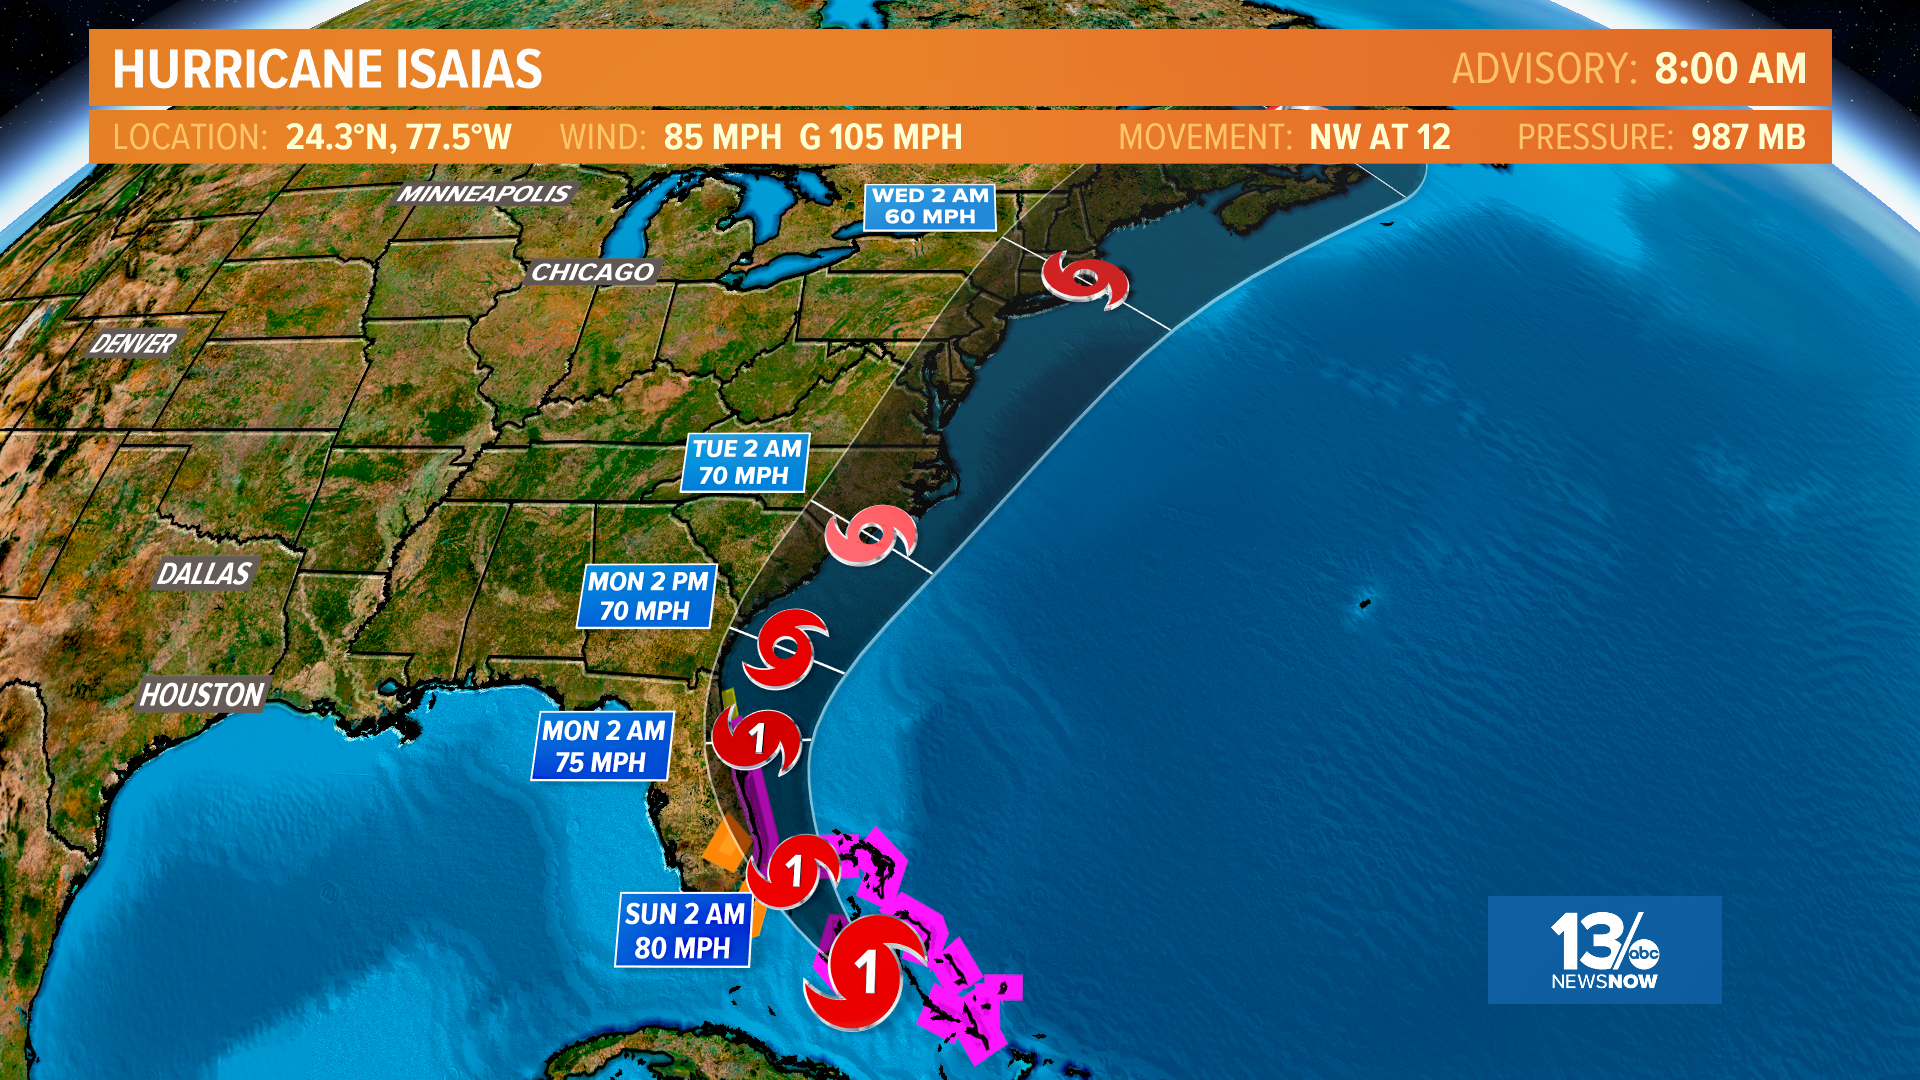 Hurricane Isaias continues to move near the Bahamas. Hurricane alerts are in place along the eastern Florida coastline as well as tropical storm, storm surge alerts.